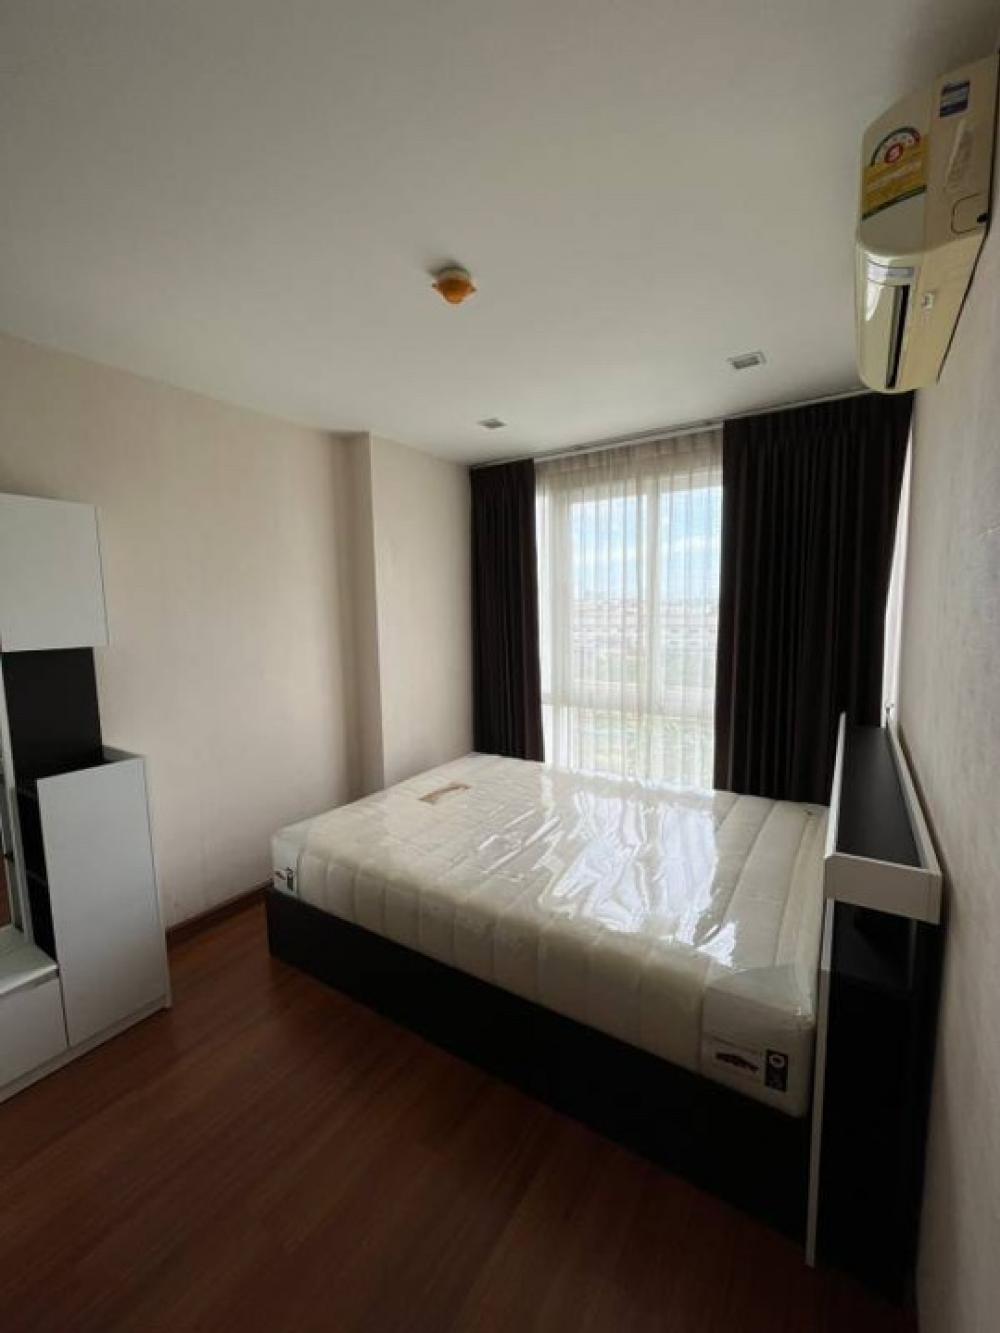 For SaleCondoLadkrabang, Suwannaphum Airport : Airlink Residence Condo for sale, 1 bedroom